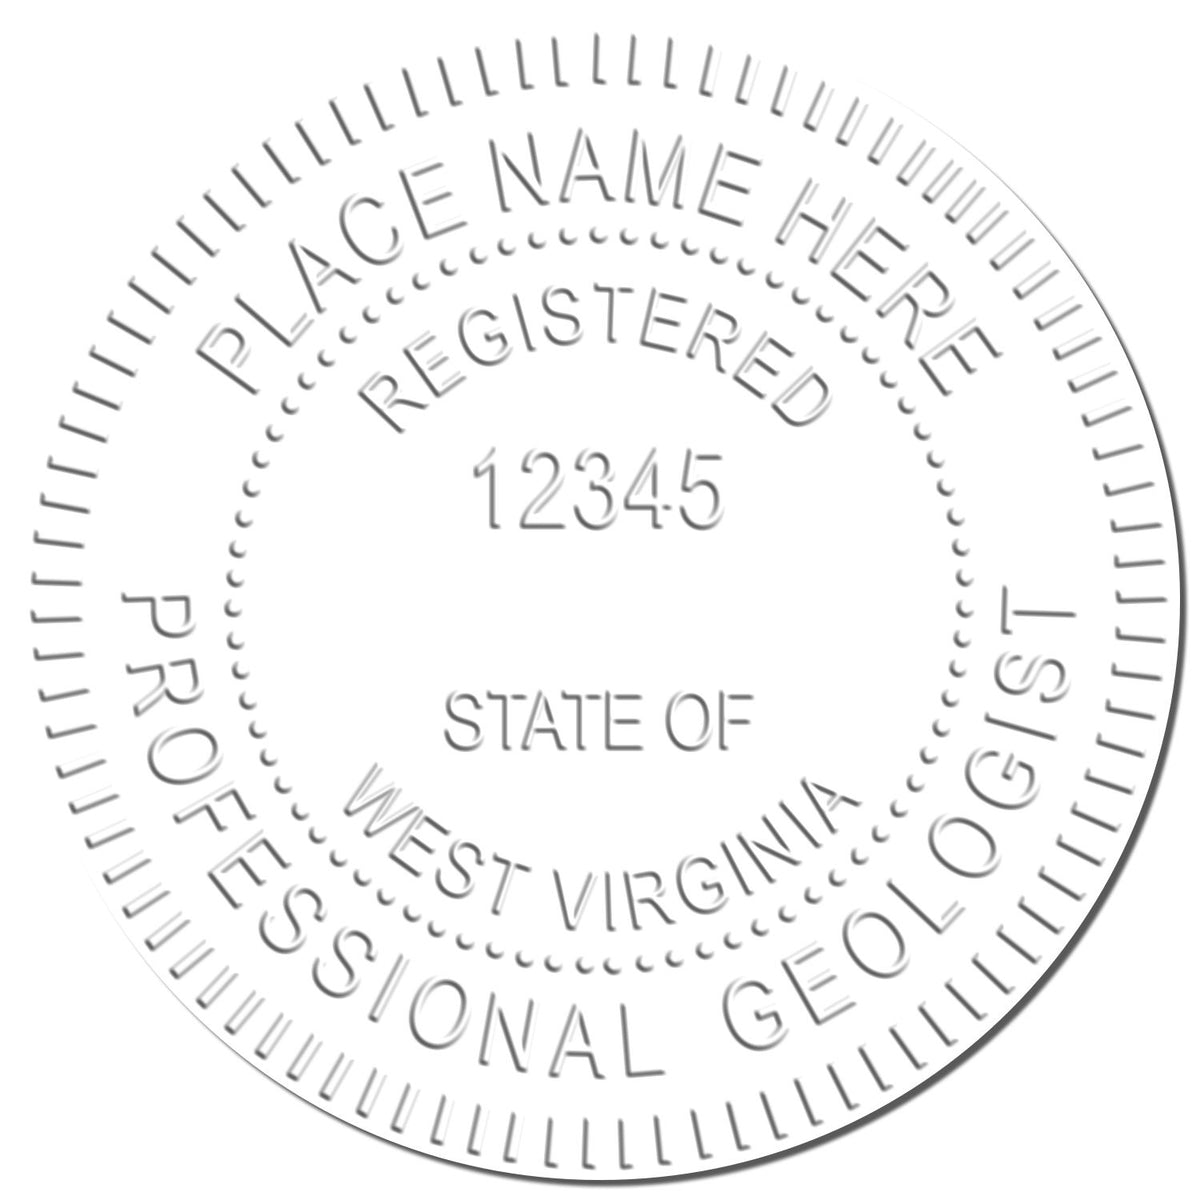 A photograph of the Hybrid West Virginia Geologist Seal stamp impression reveals a vivid, professional image of the on paper.